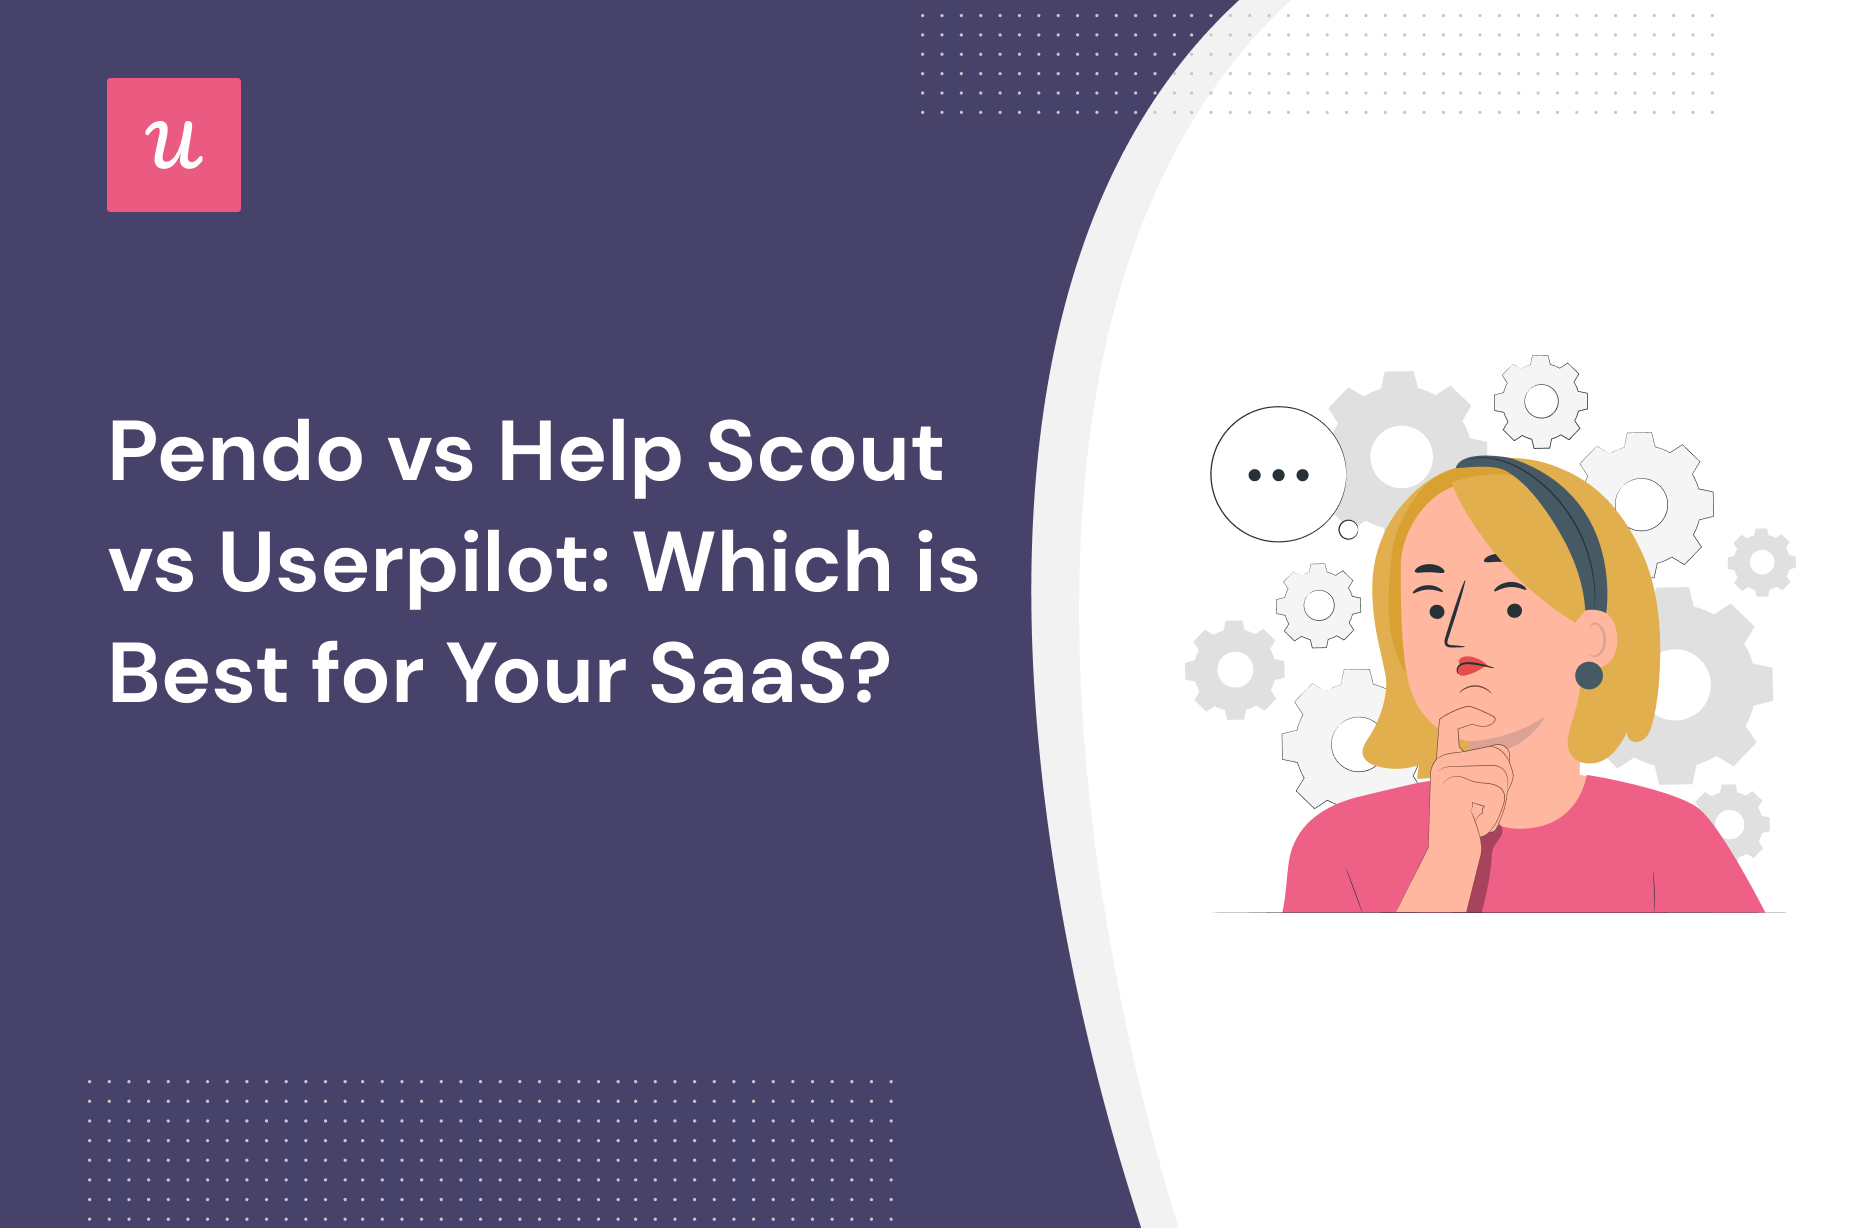 Pendo vs Help Scout vs Userpilot: Which is Best for Your SaaS?